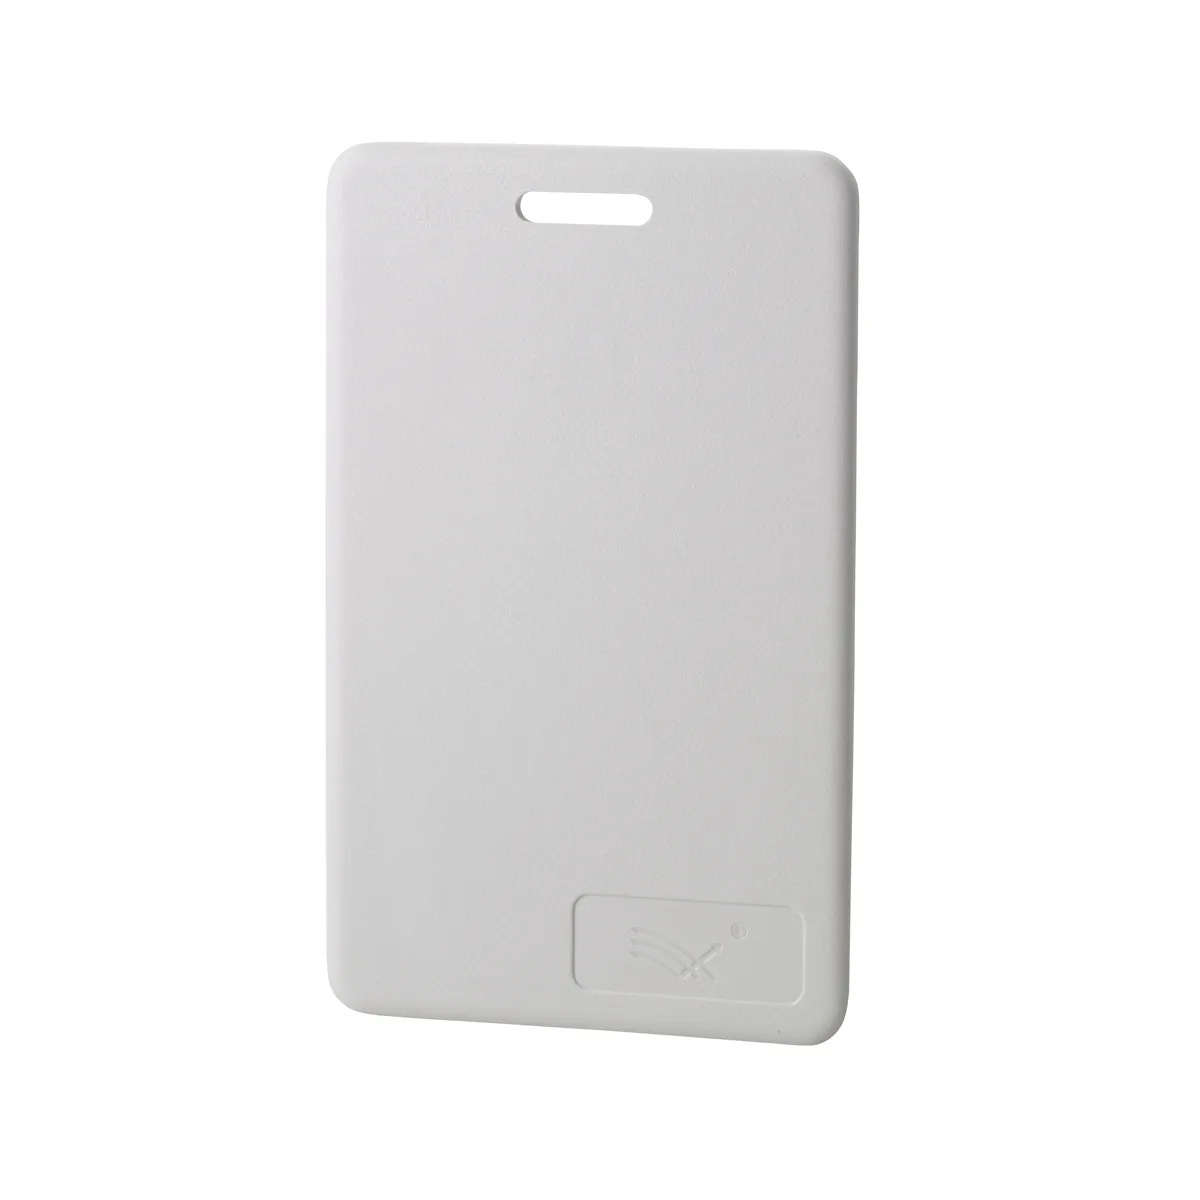 PSC-1-A Standard Light Proximity Card, Pack of 100